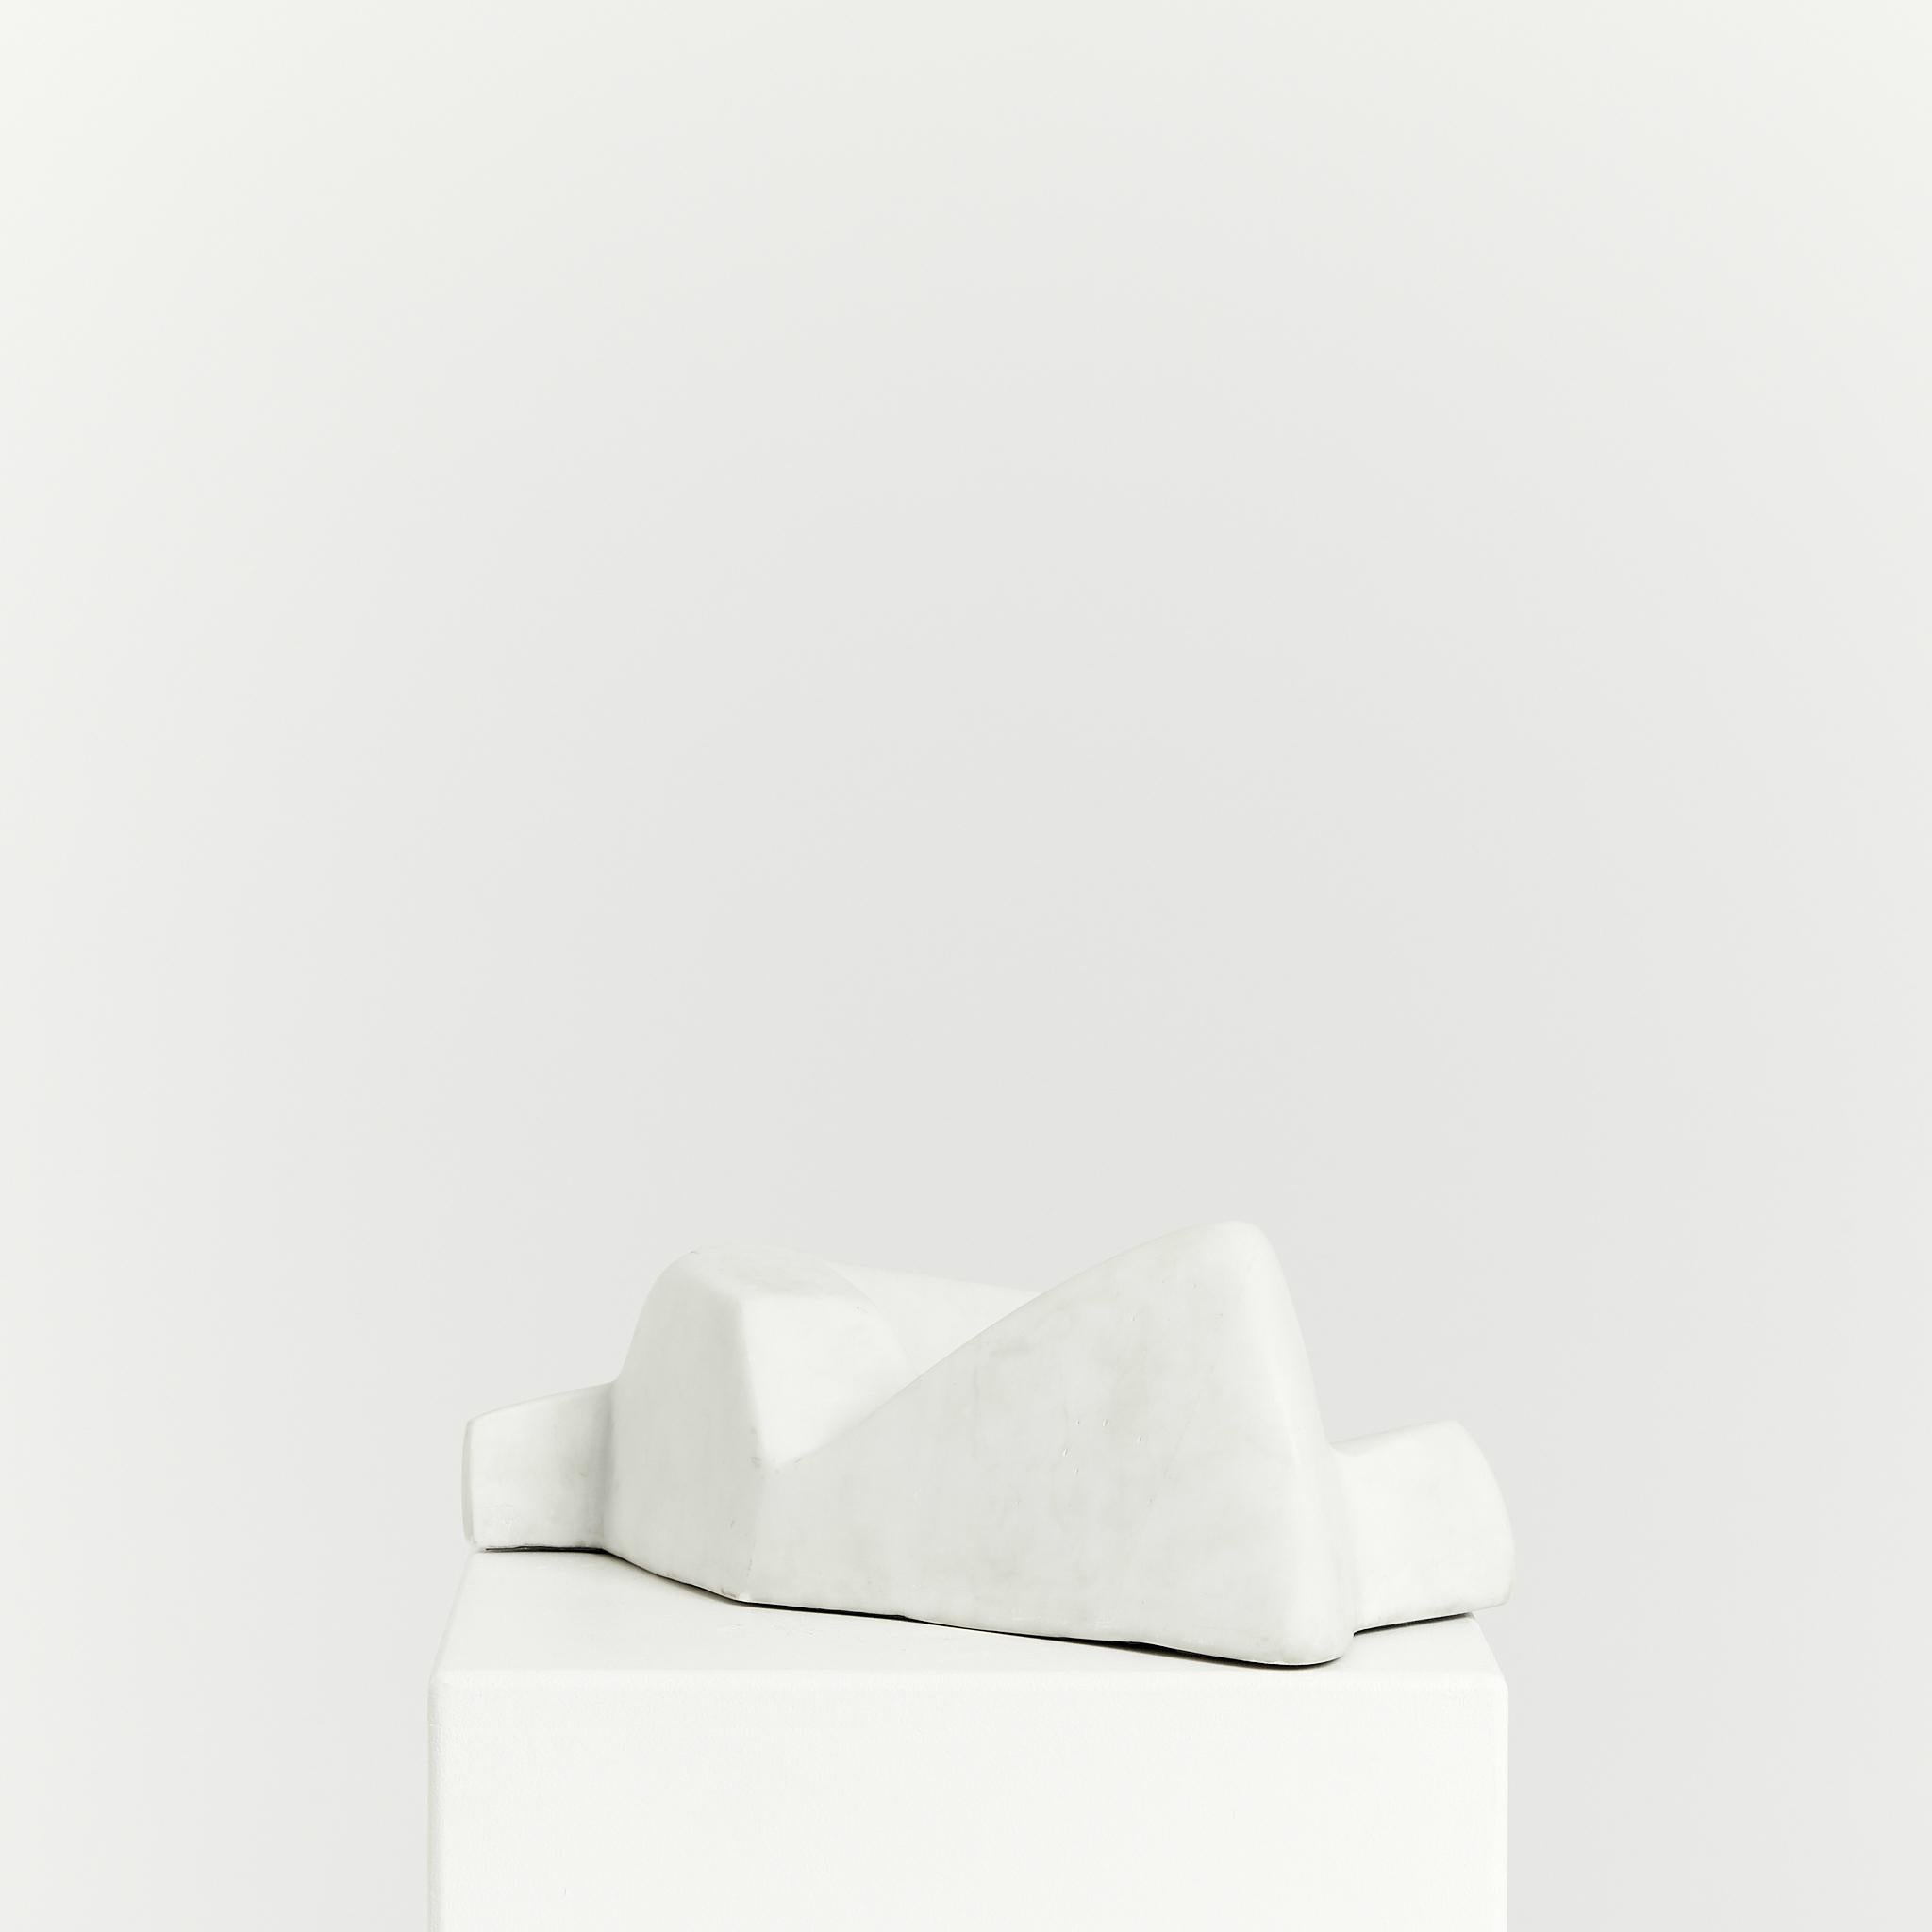 Hand-Carved Angular Abstract Sculpture in Carrara Marble